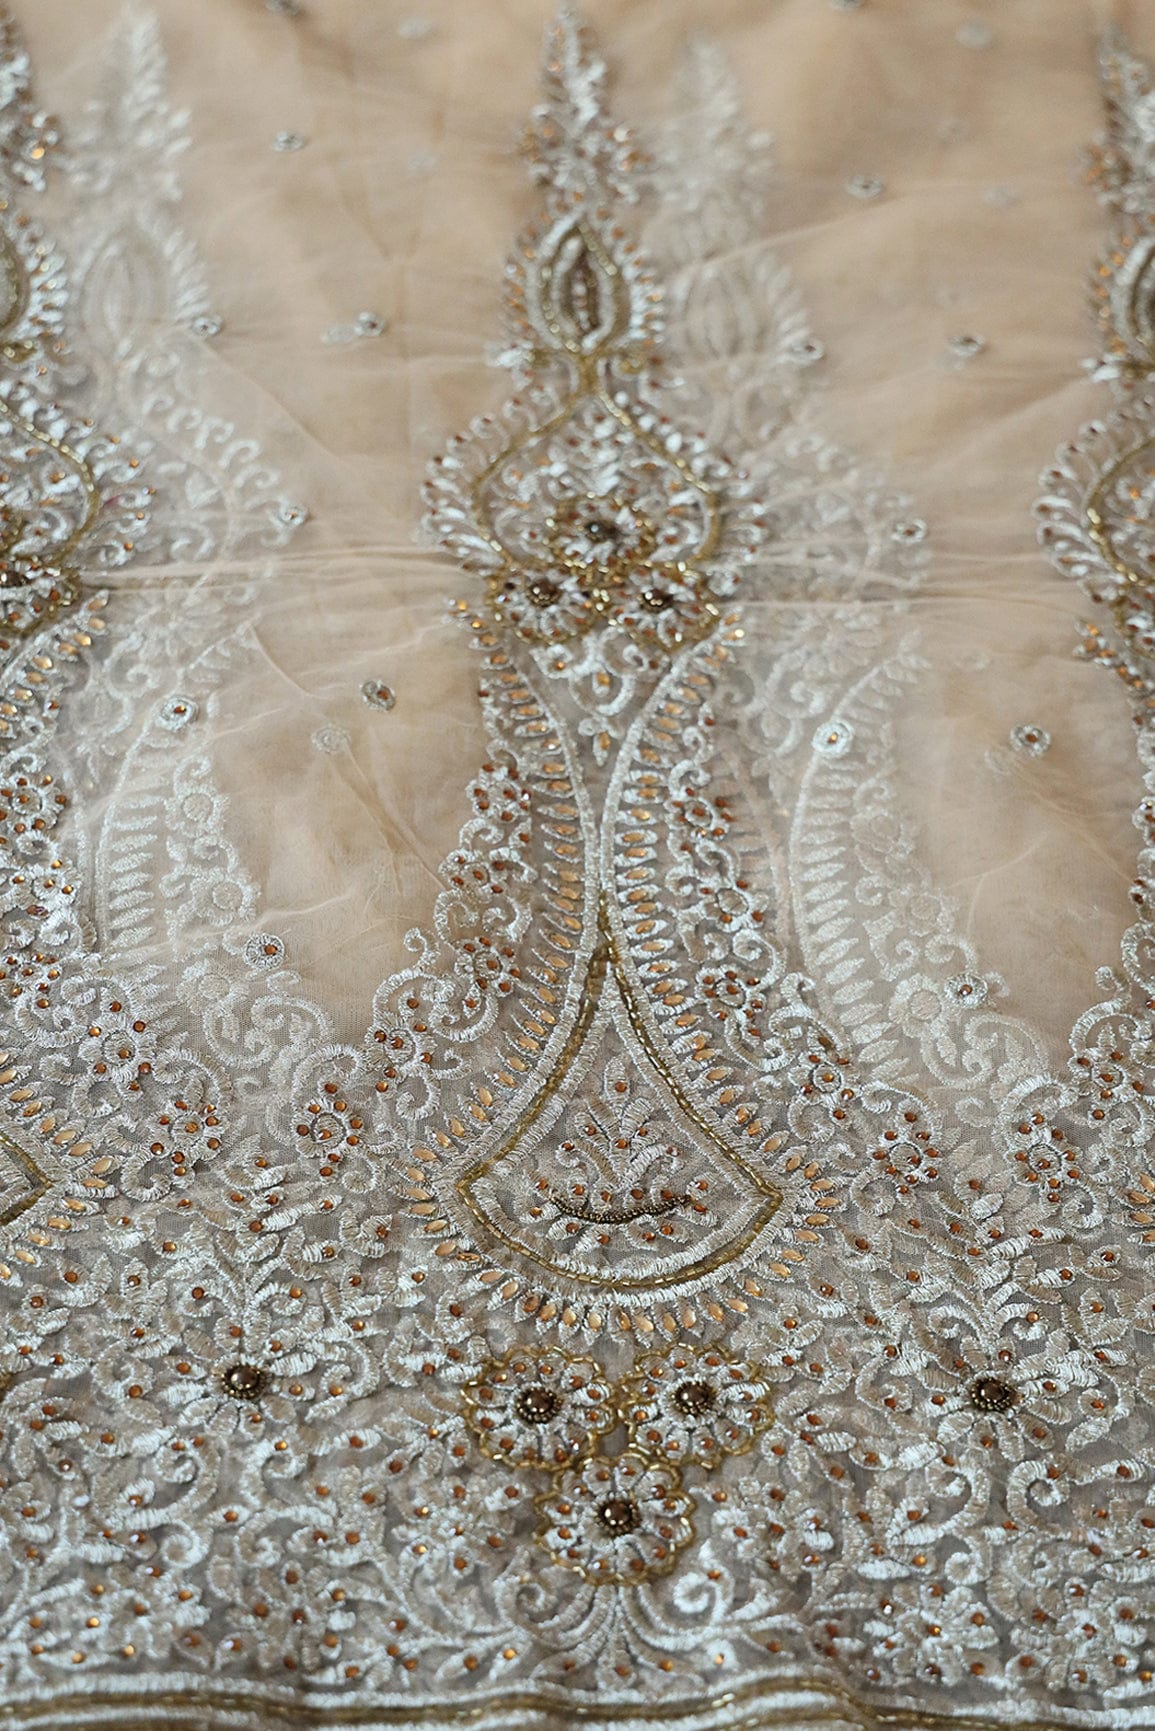 embroidered net fabric wholesale,golden embroidered net fabric,golden embroidery fabric,silk net fabric,net fabric for blouse,net fabric price,net fabric for dupatta